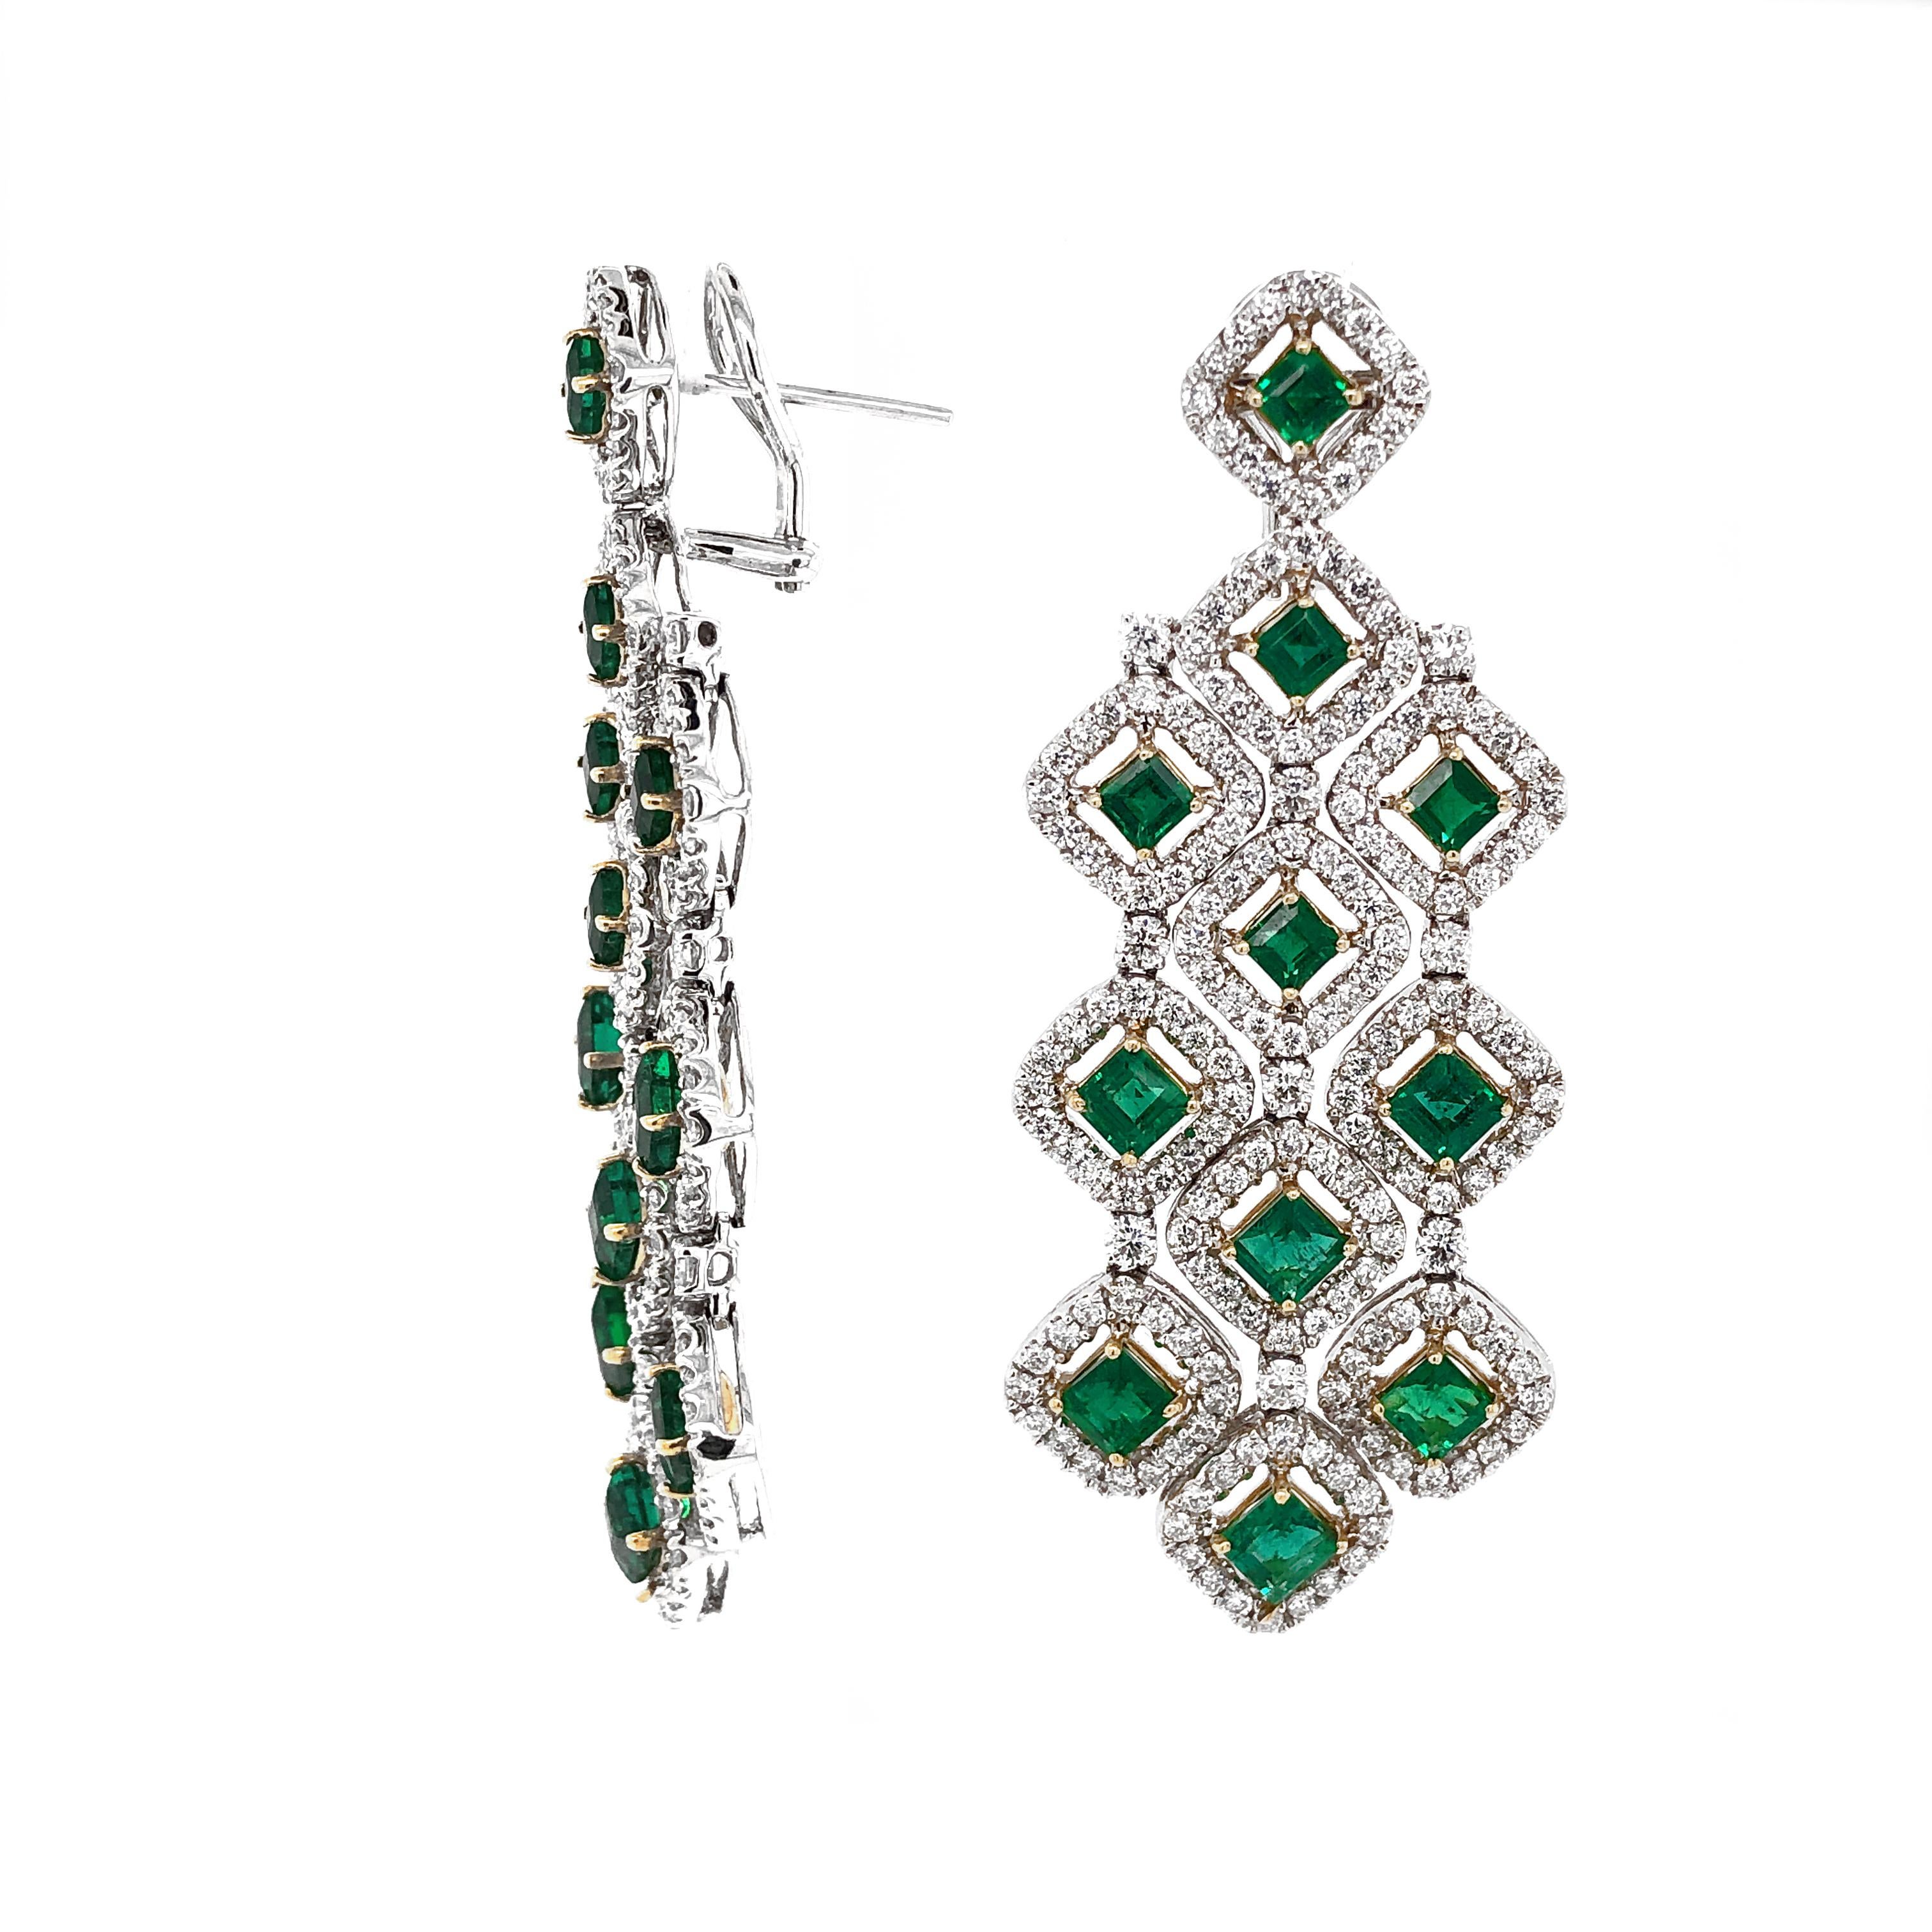 Zambian Square Cut Emeralds 7.11 Carat Chandelier 18k Gold Earrings In New Condition For Sale In New York, NY